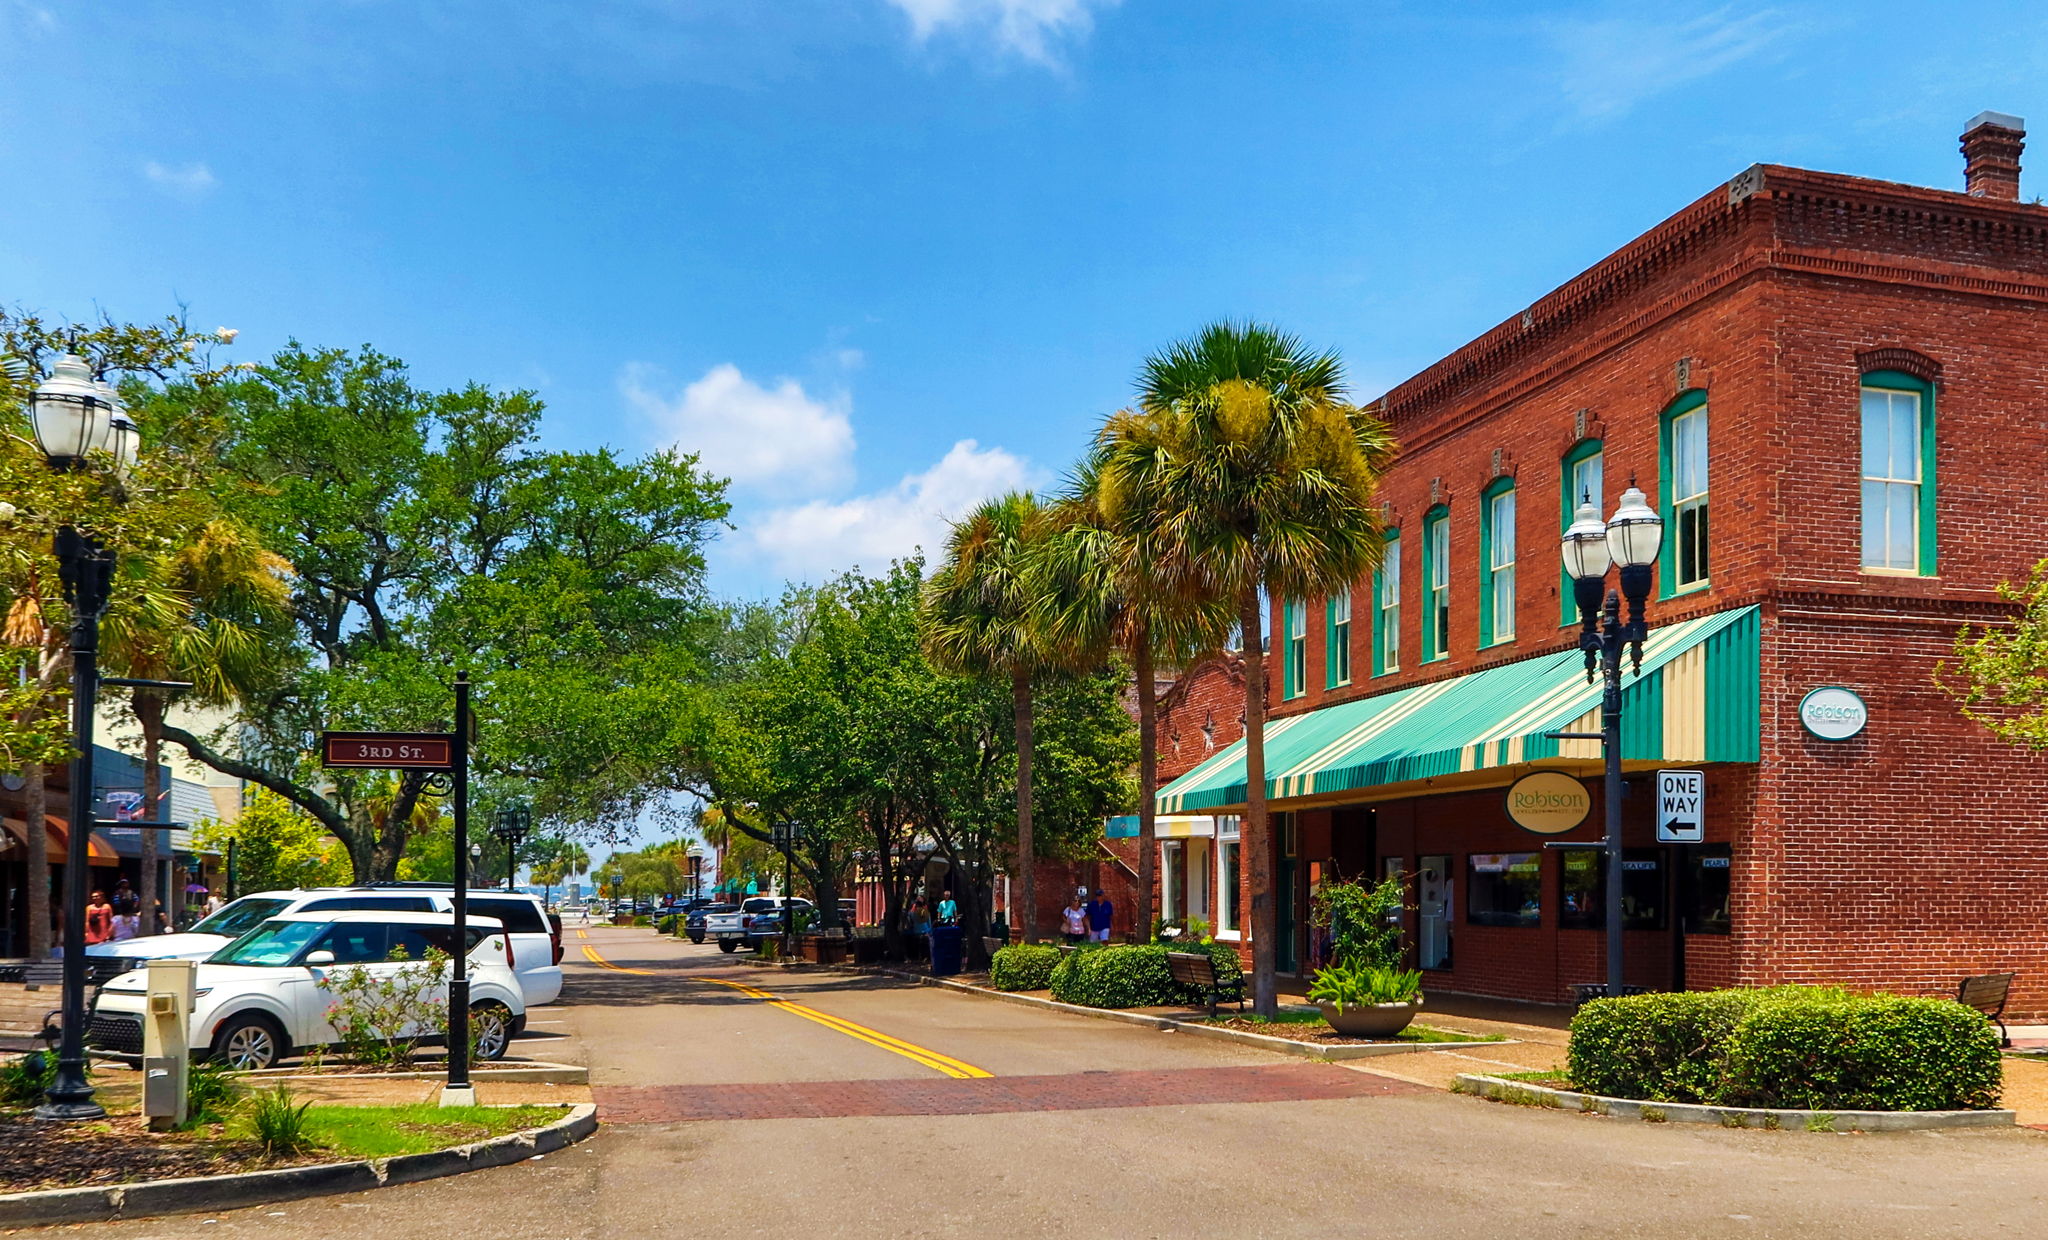 No doubt, the historic downtown is captivating, naturally beautiful and just steps away from your new home.